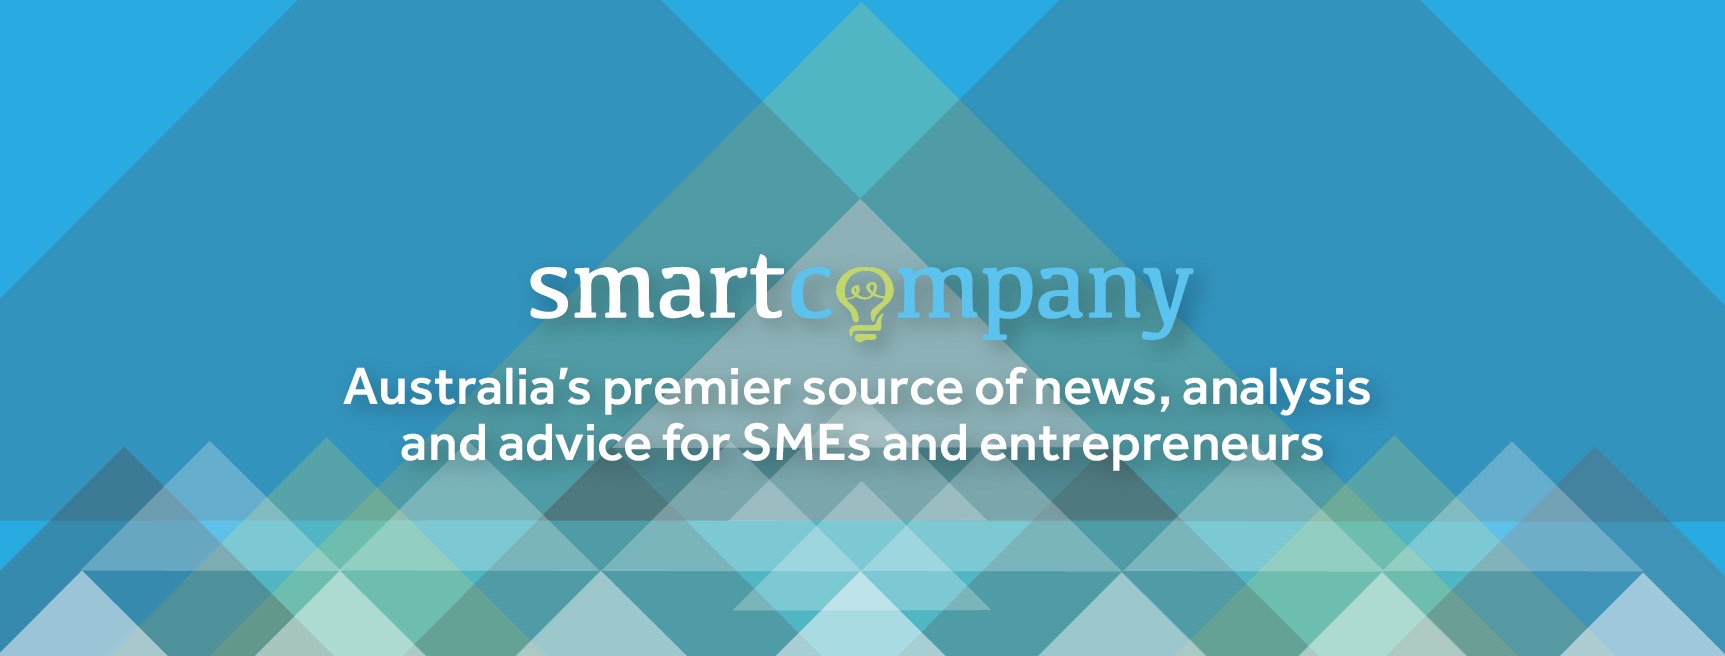 Smartcompany get first month free on a monthly subscription(usually $9.90) with promo code